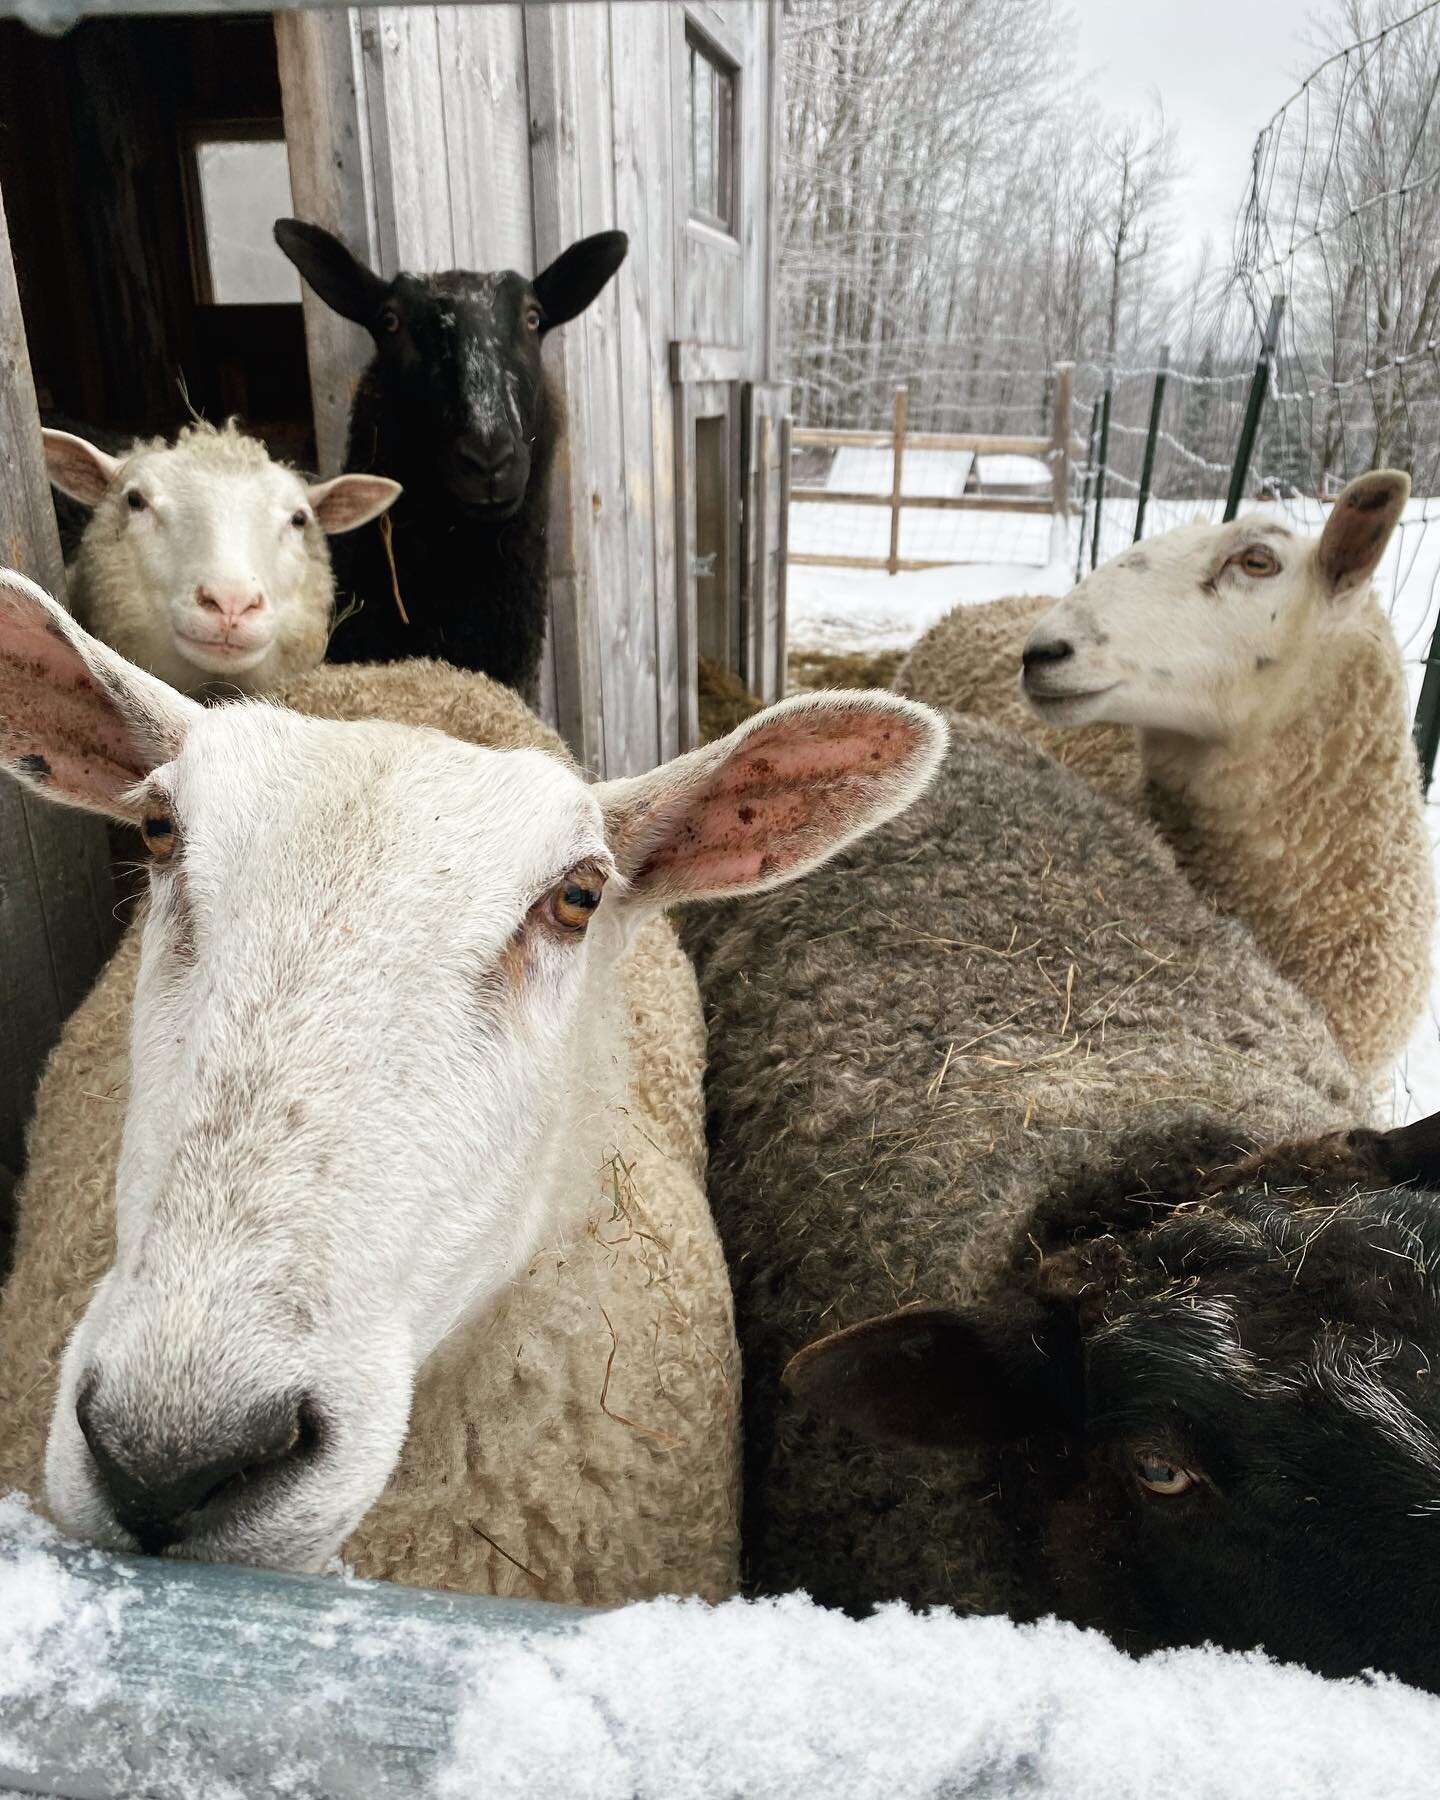 We&rsquo;re all excited for the season of the light. 🌞 #imbolc #imbolcblessings #sheep #february #vermontfarm